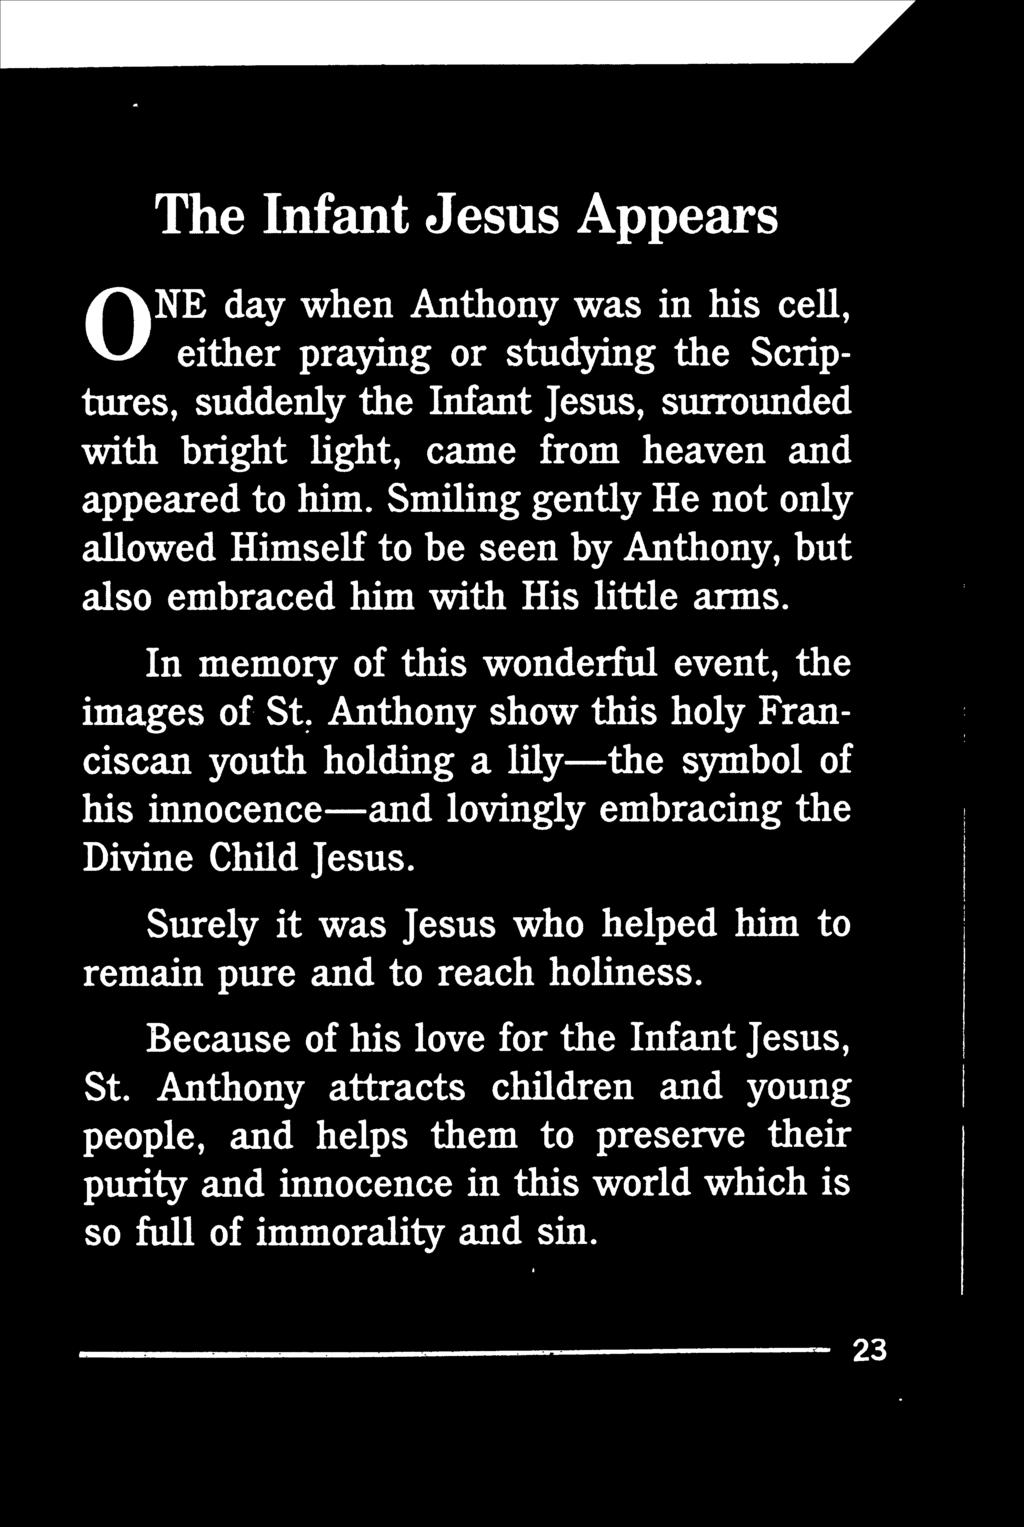 ONE The Infant Jesus Appears day when Anthony was in his cell, either praying or studying the Scriptures, suddenly the Infant Jesus, surrounded with bright light, came from heaven and appeared to him.